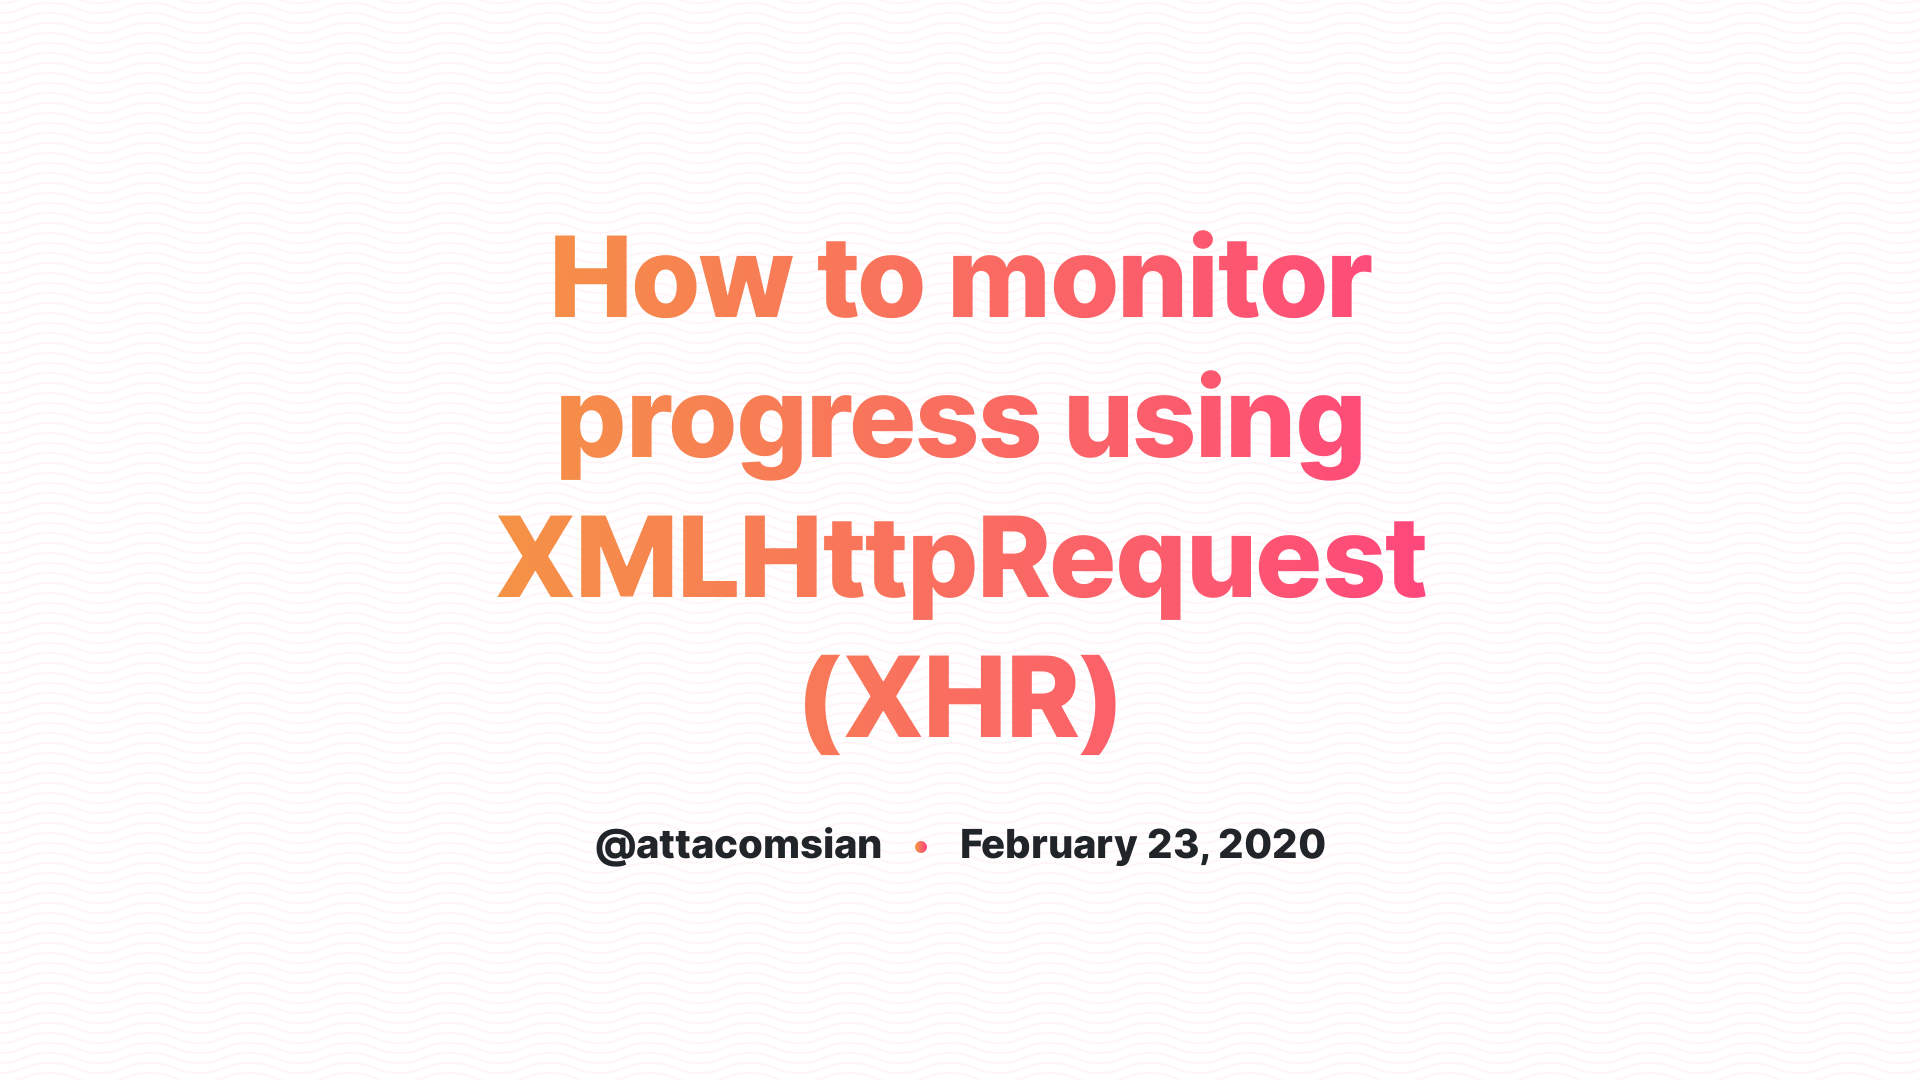 Access to xmlhttprequest at